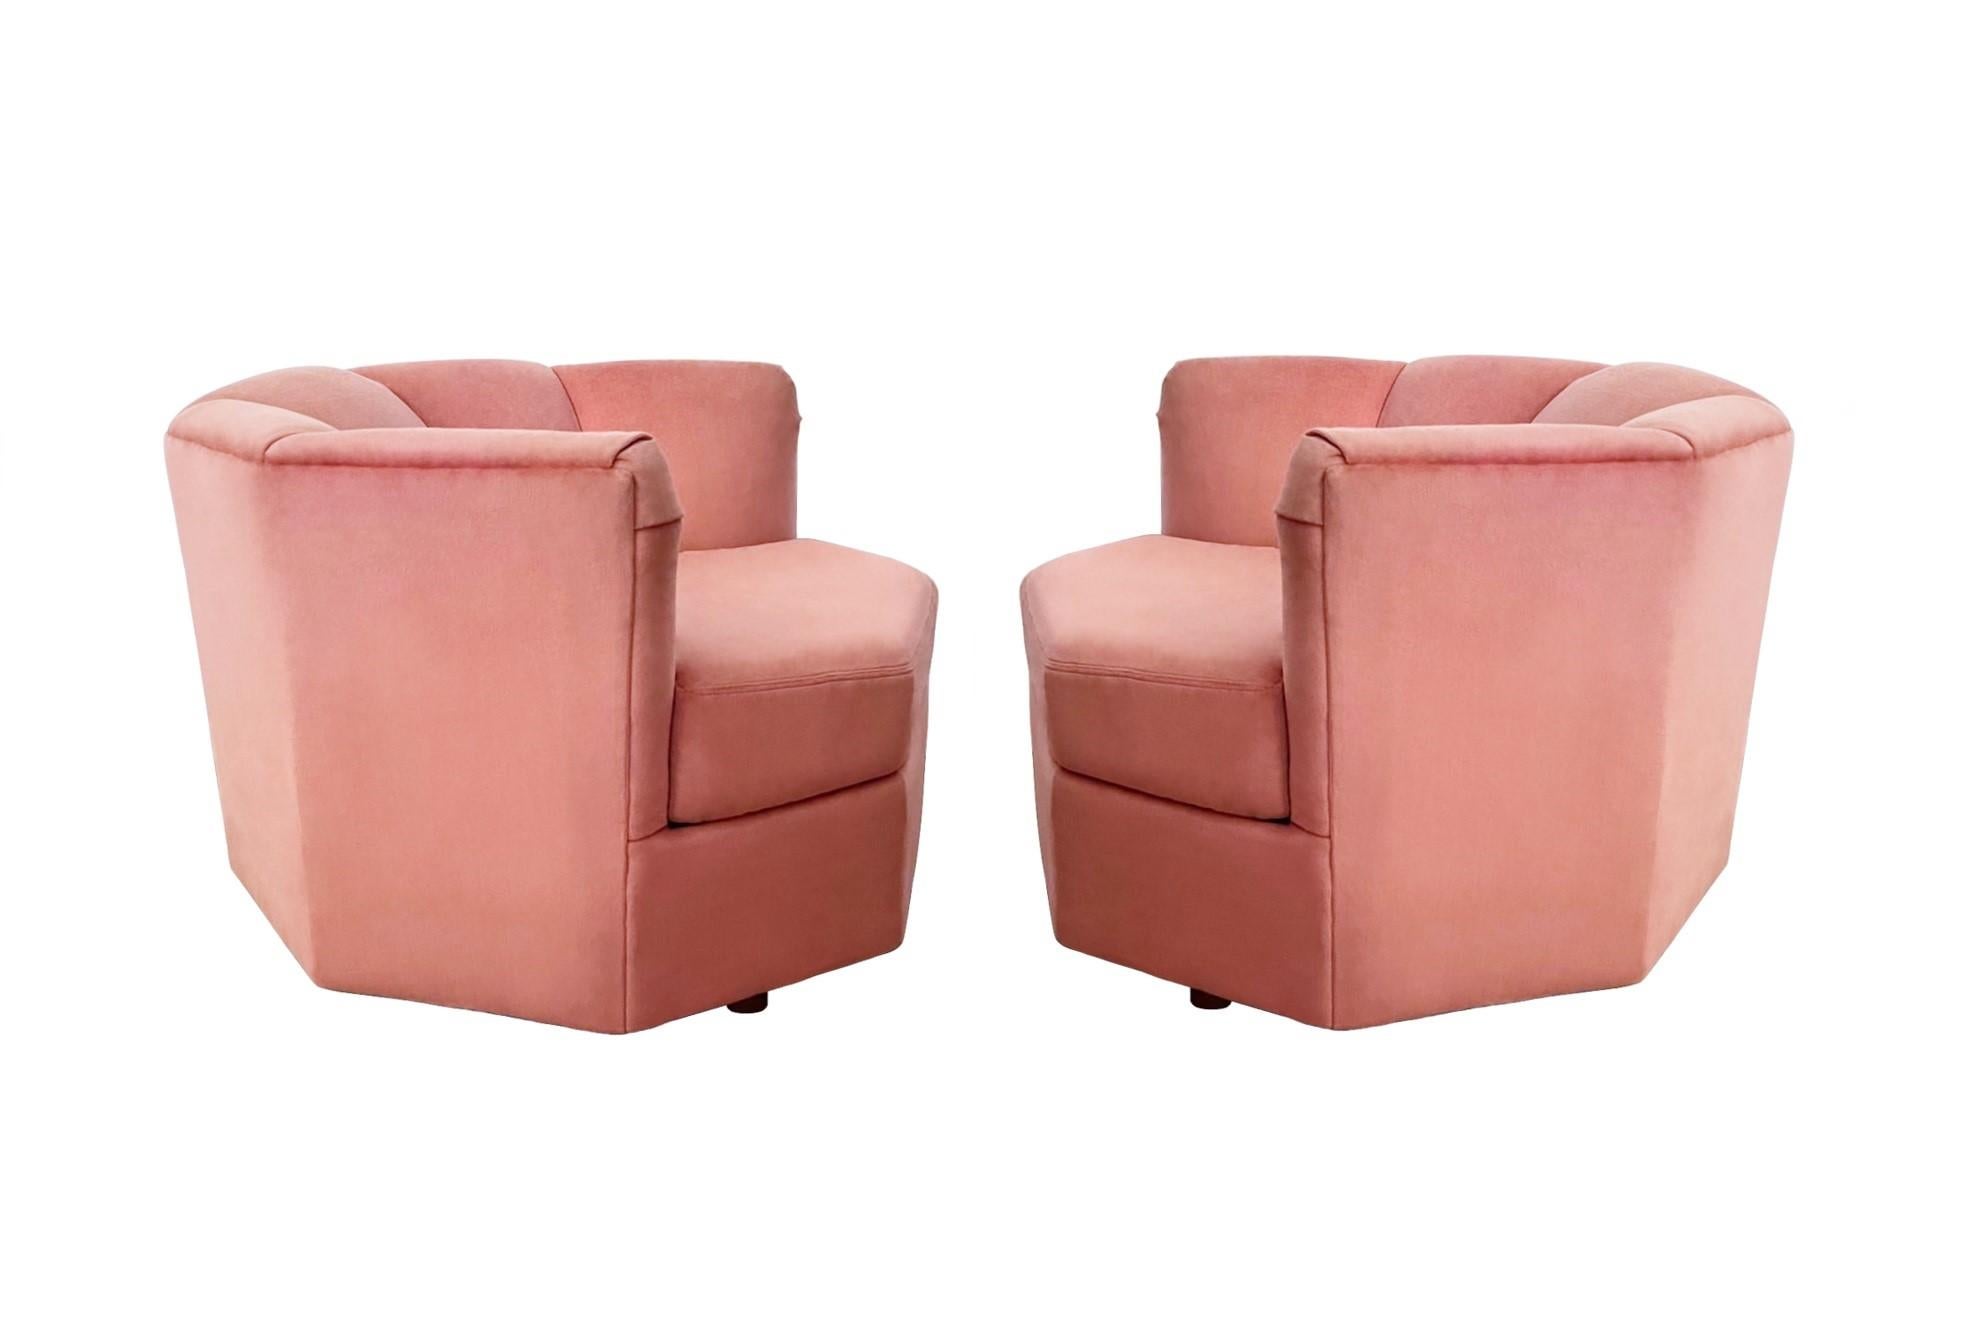 1970s Hexagonal Club Chairs in a Dusty Rose Velvet For Sale 3